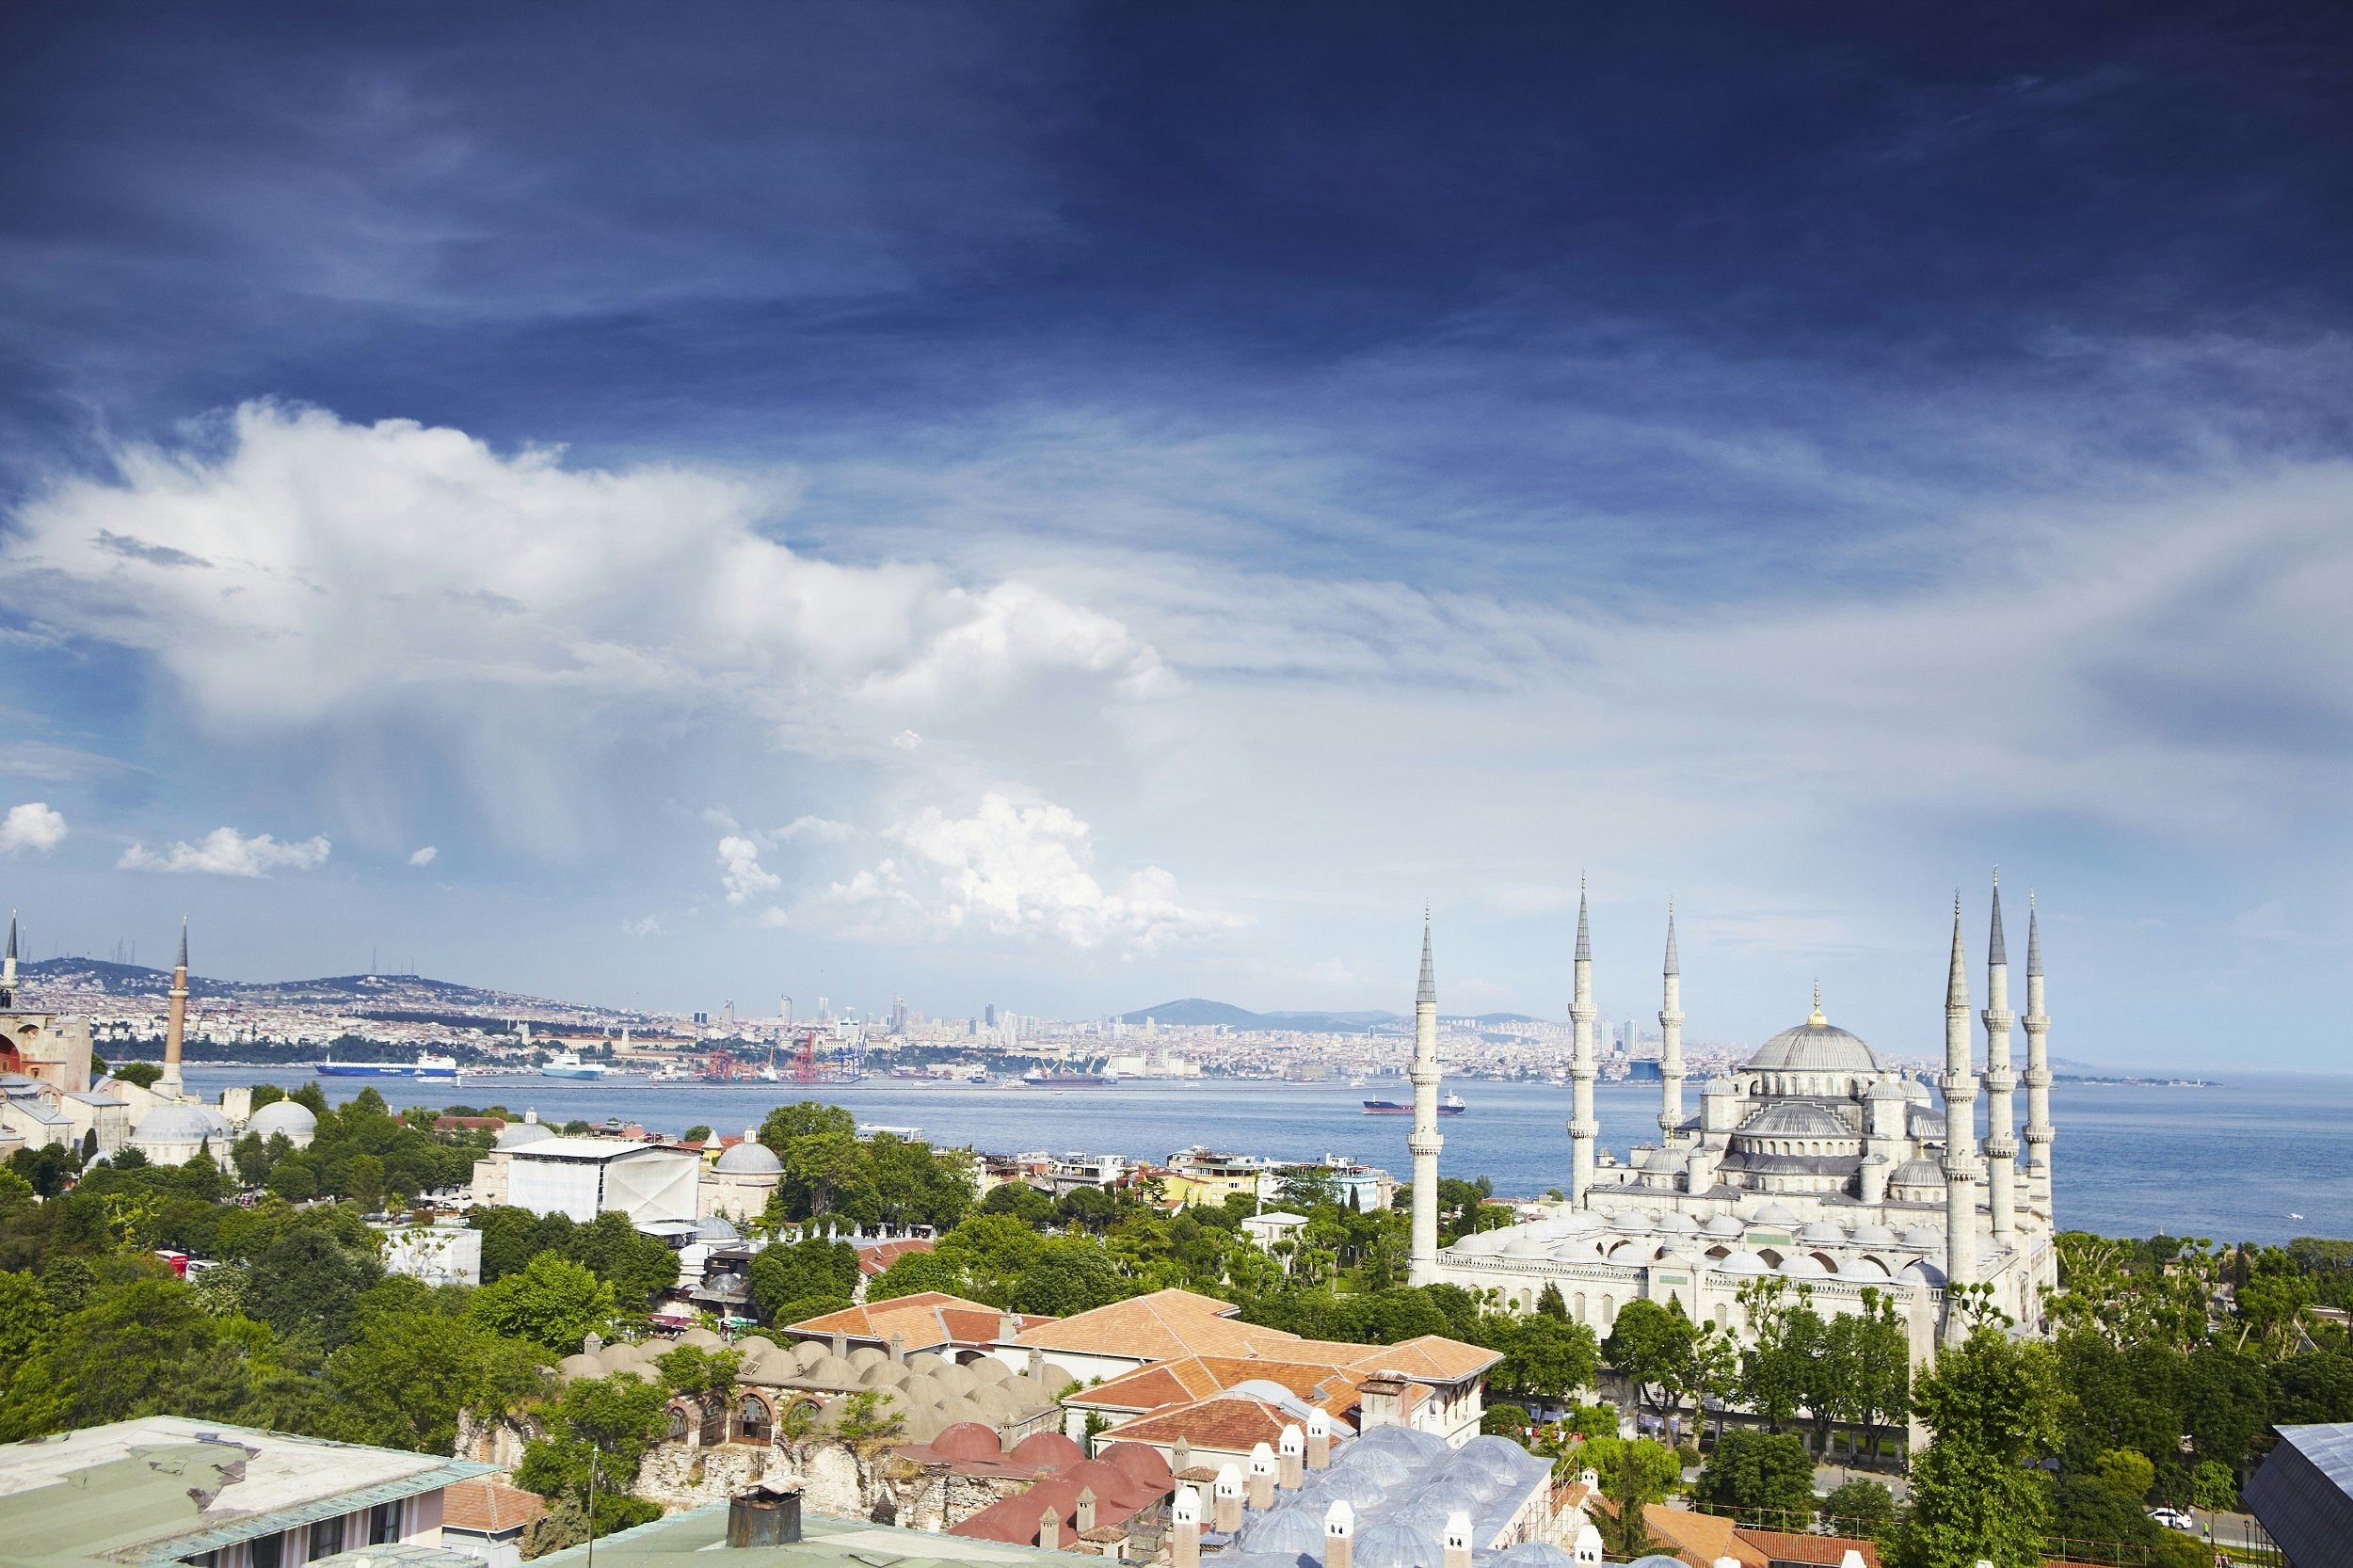 Rooftops leading to the domes and six minarets of the Blue Mosque, with the wide Bosphorus strait in the background.